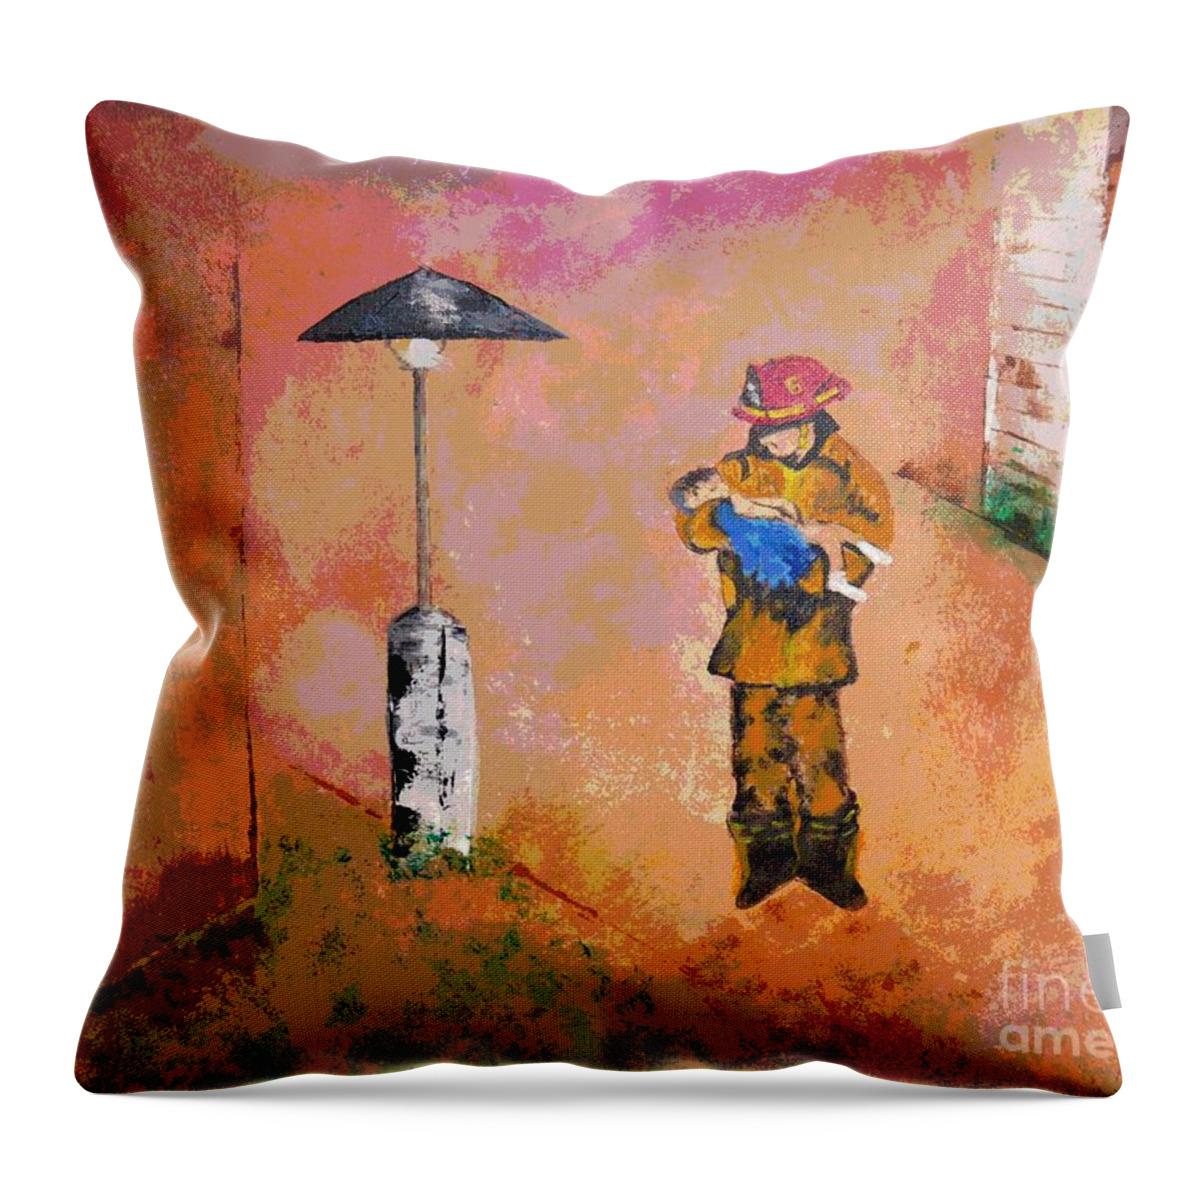 Fireman Throw Pillow featuring the painting Rescue by Denise Tomasura